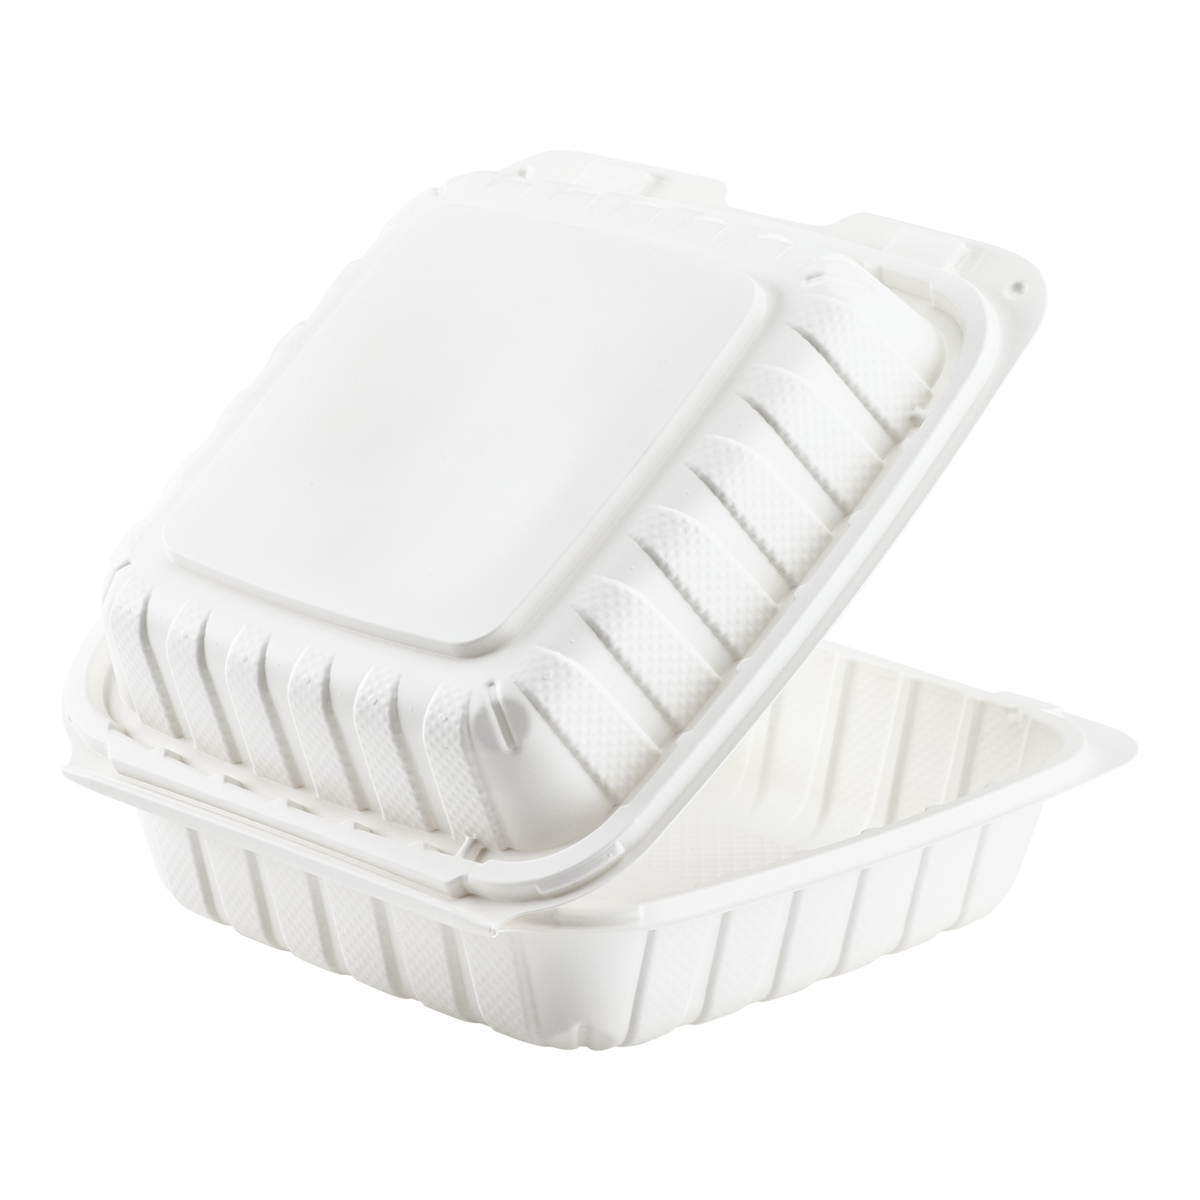 Take Out Containers - To Go Boxes